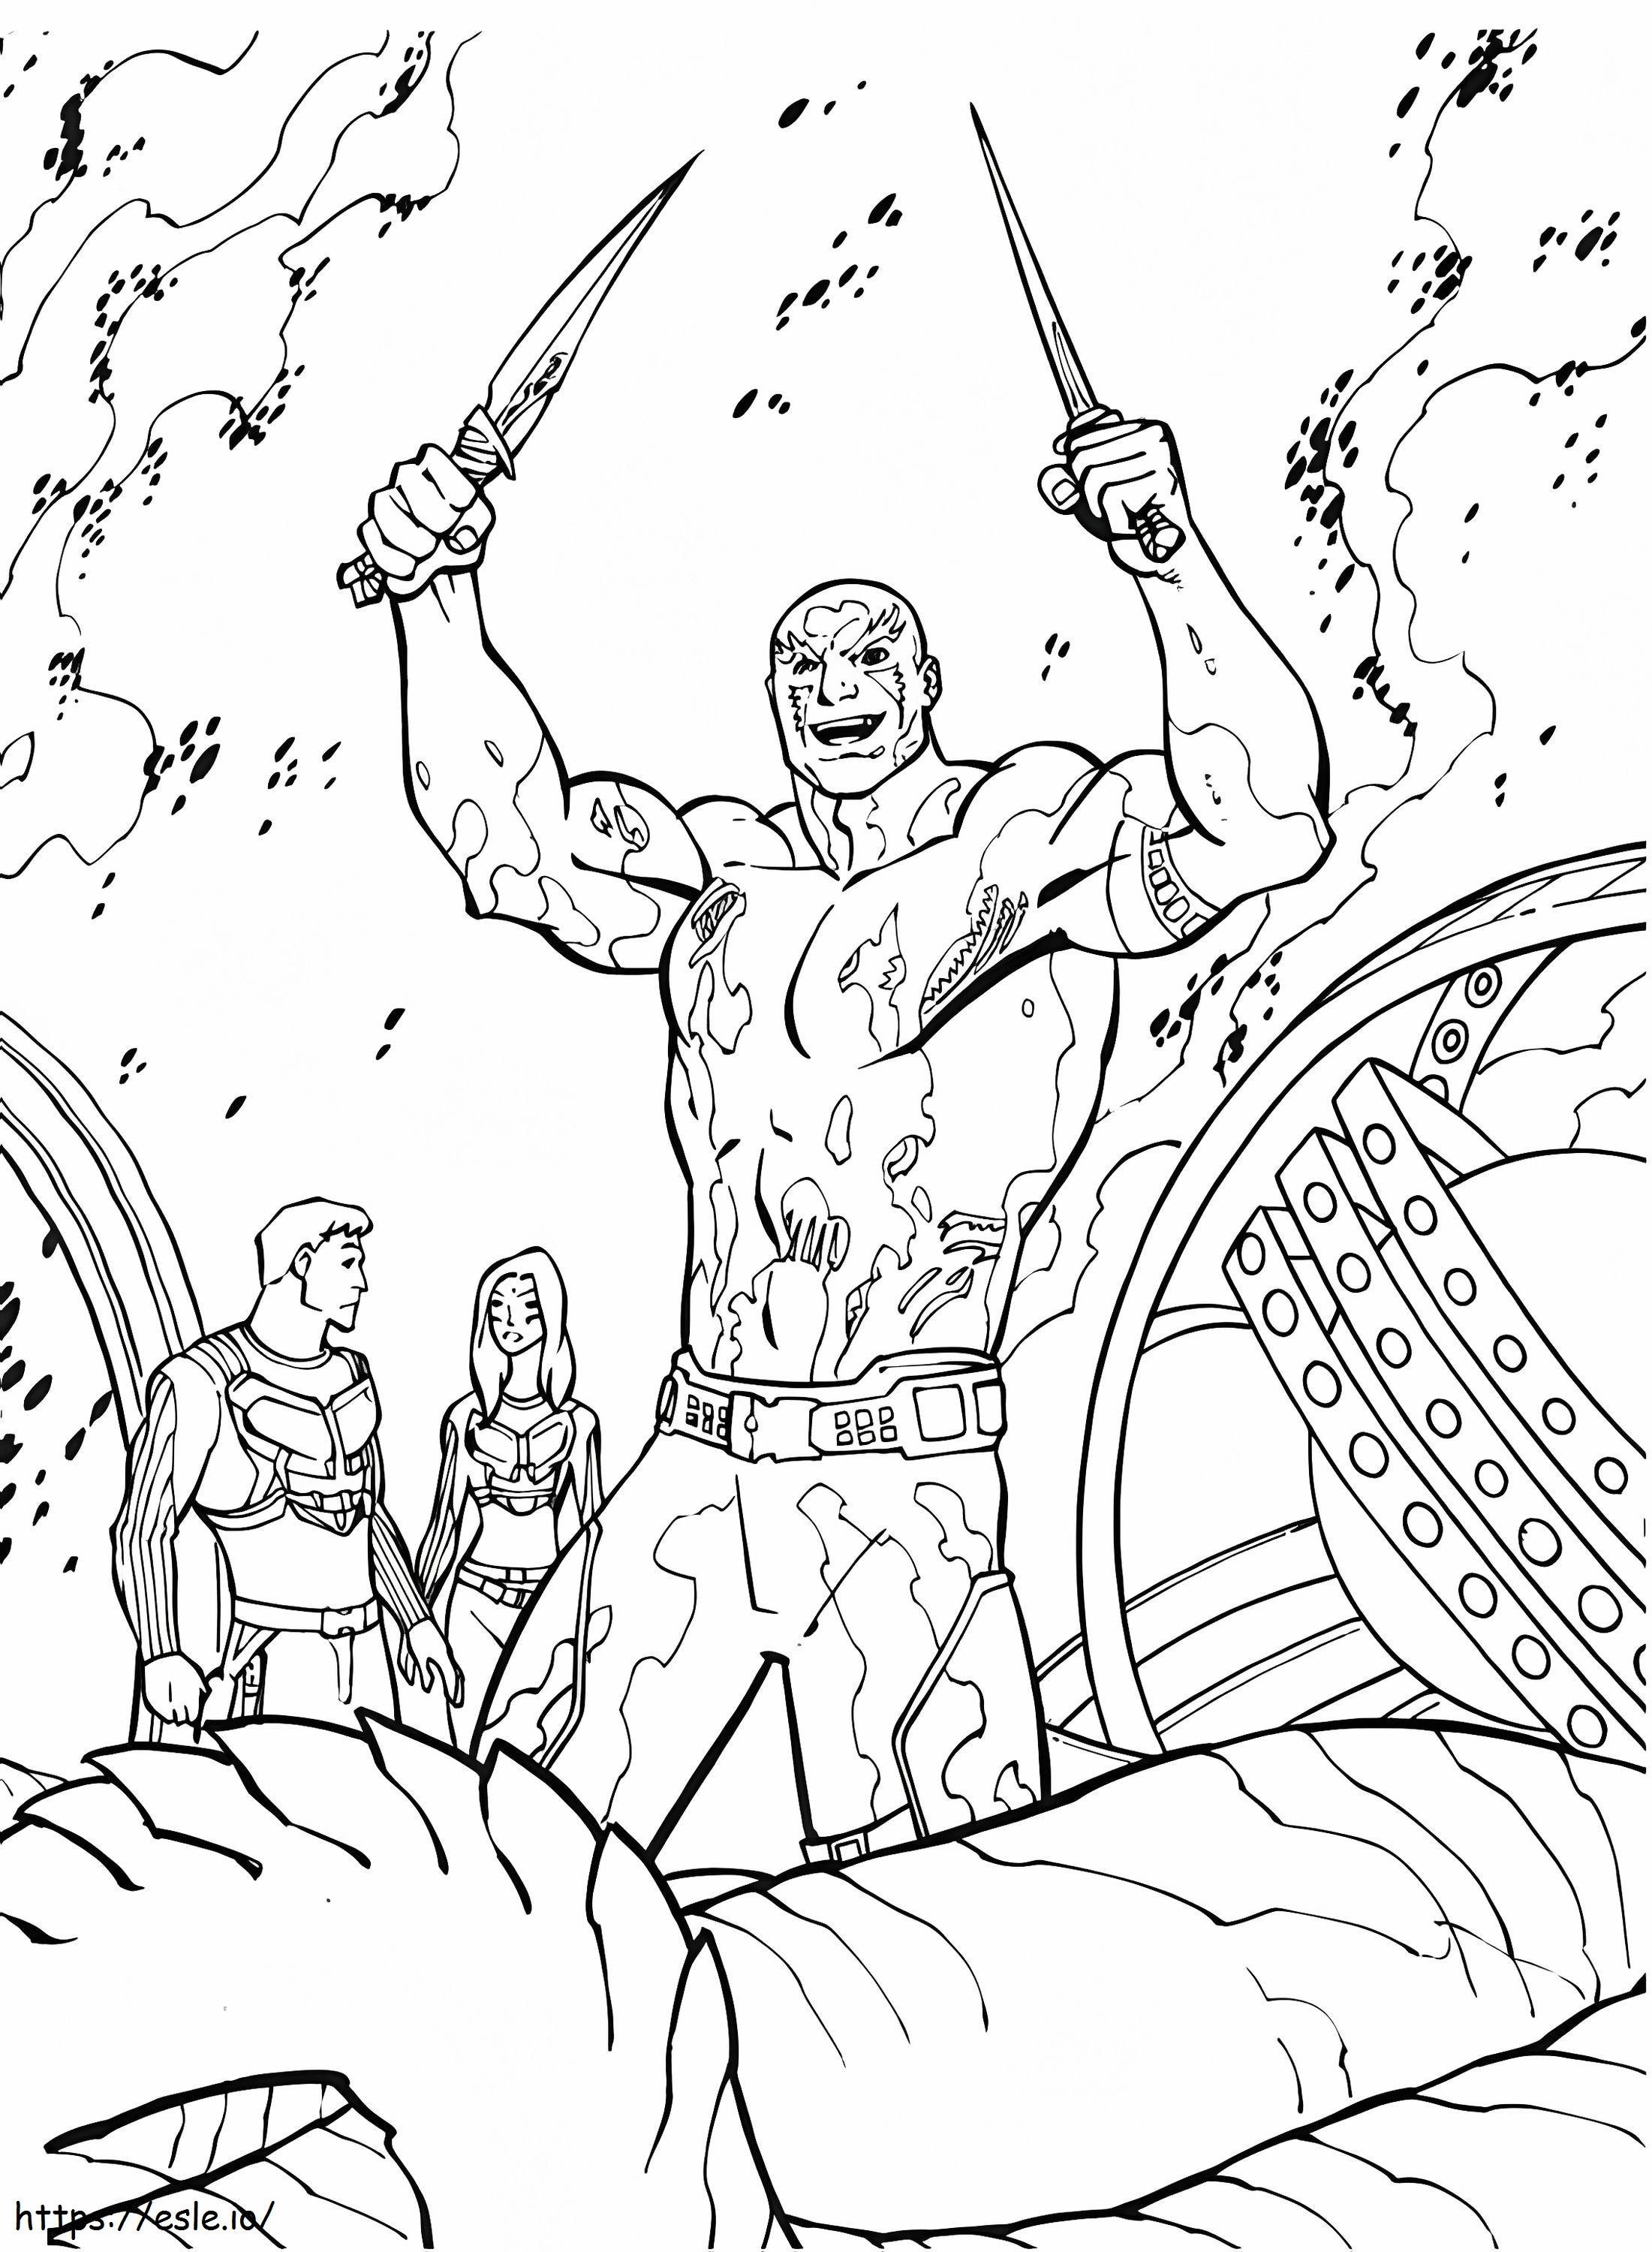 Happy Drax A4 coloring page